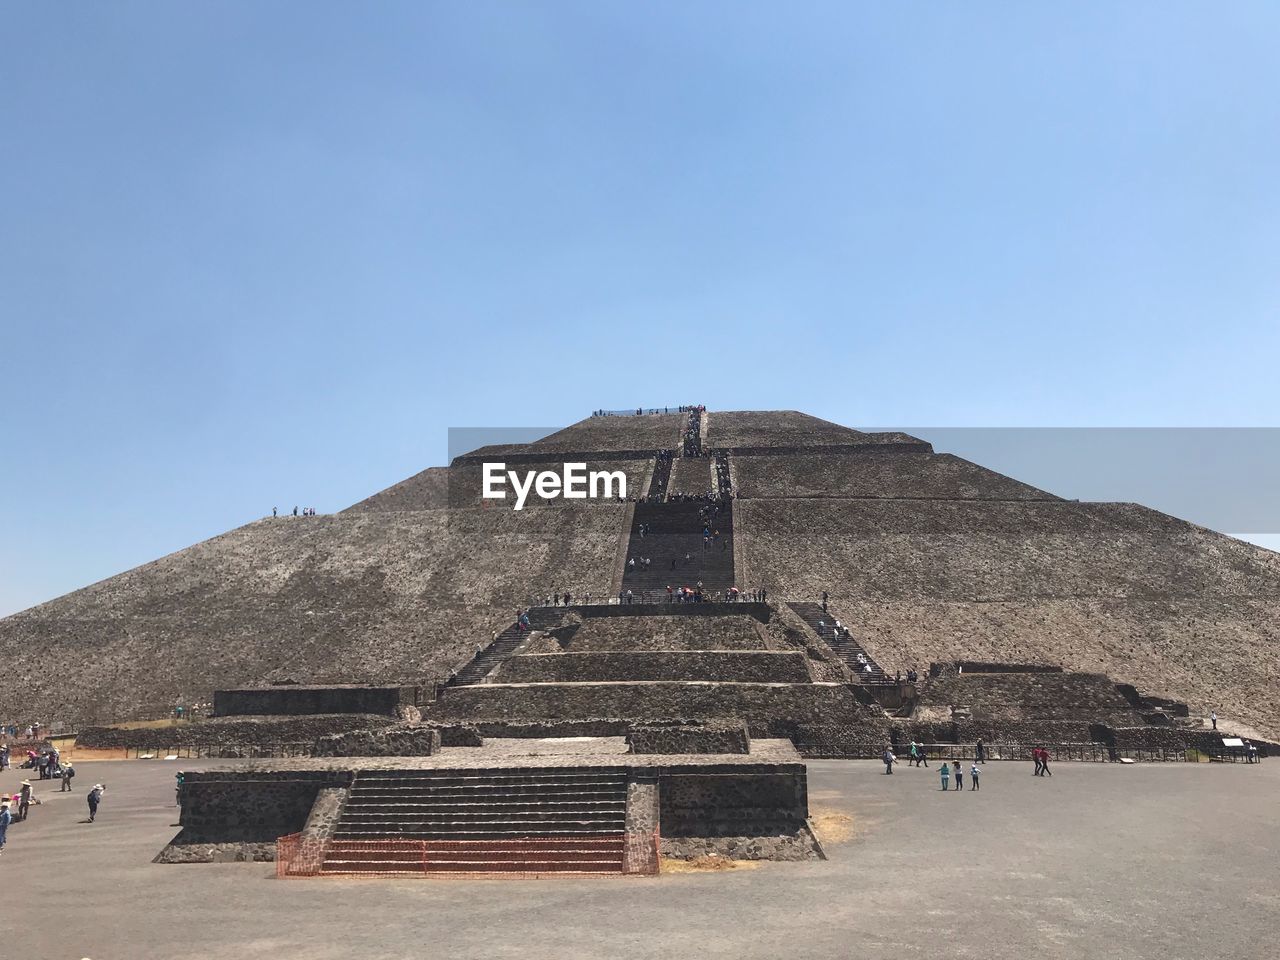 Pyramid of the sun, constructed 200 ad, teotihuacan, mexico  